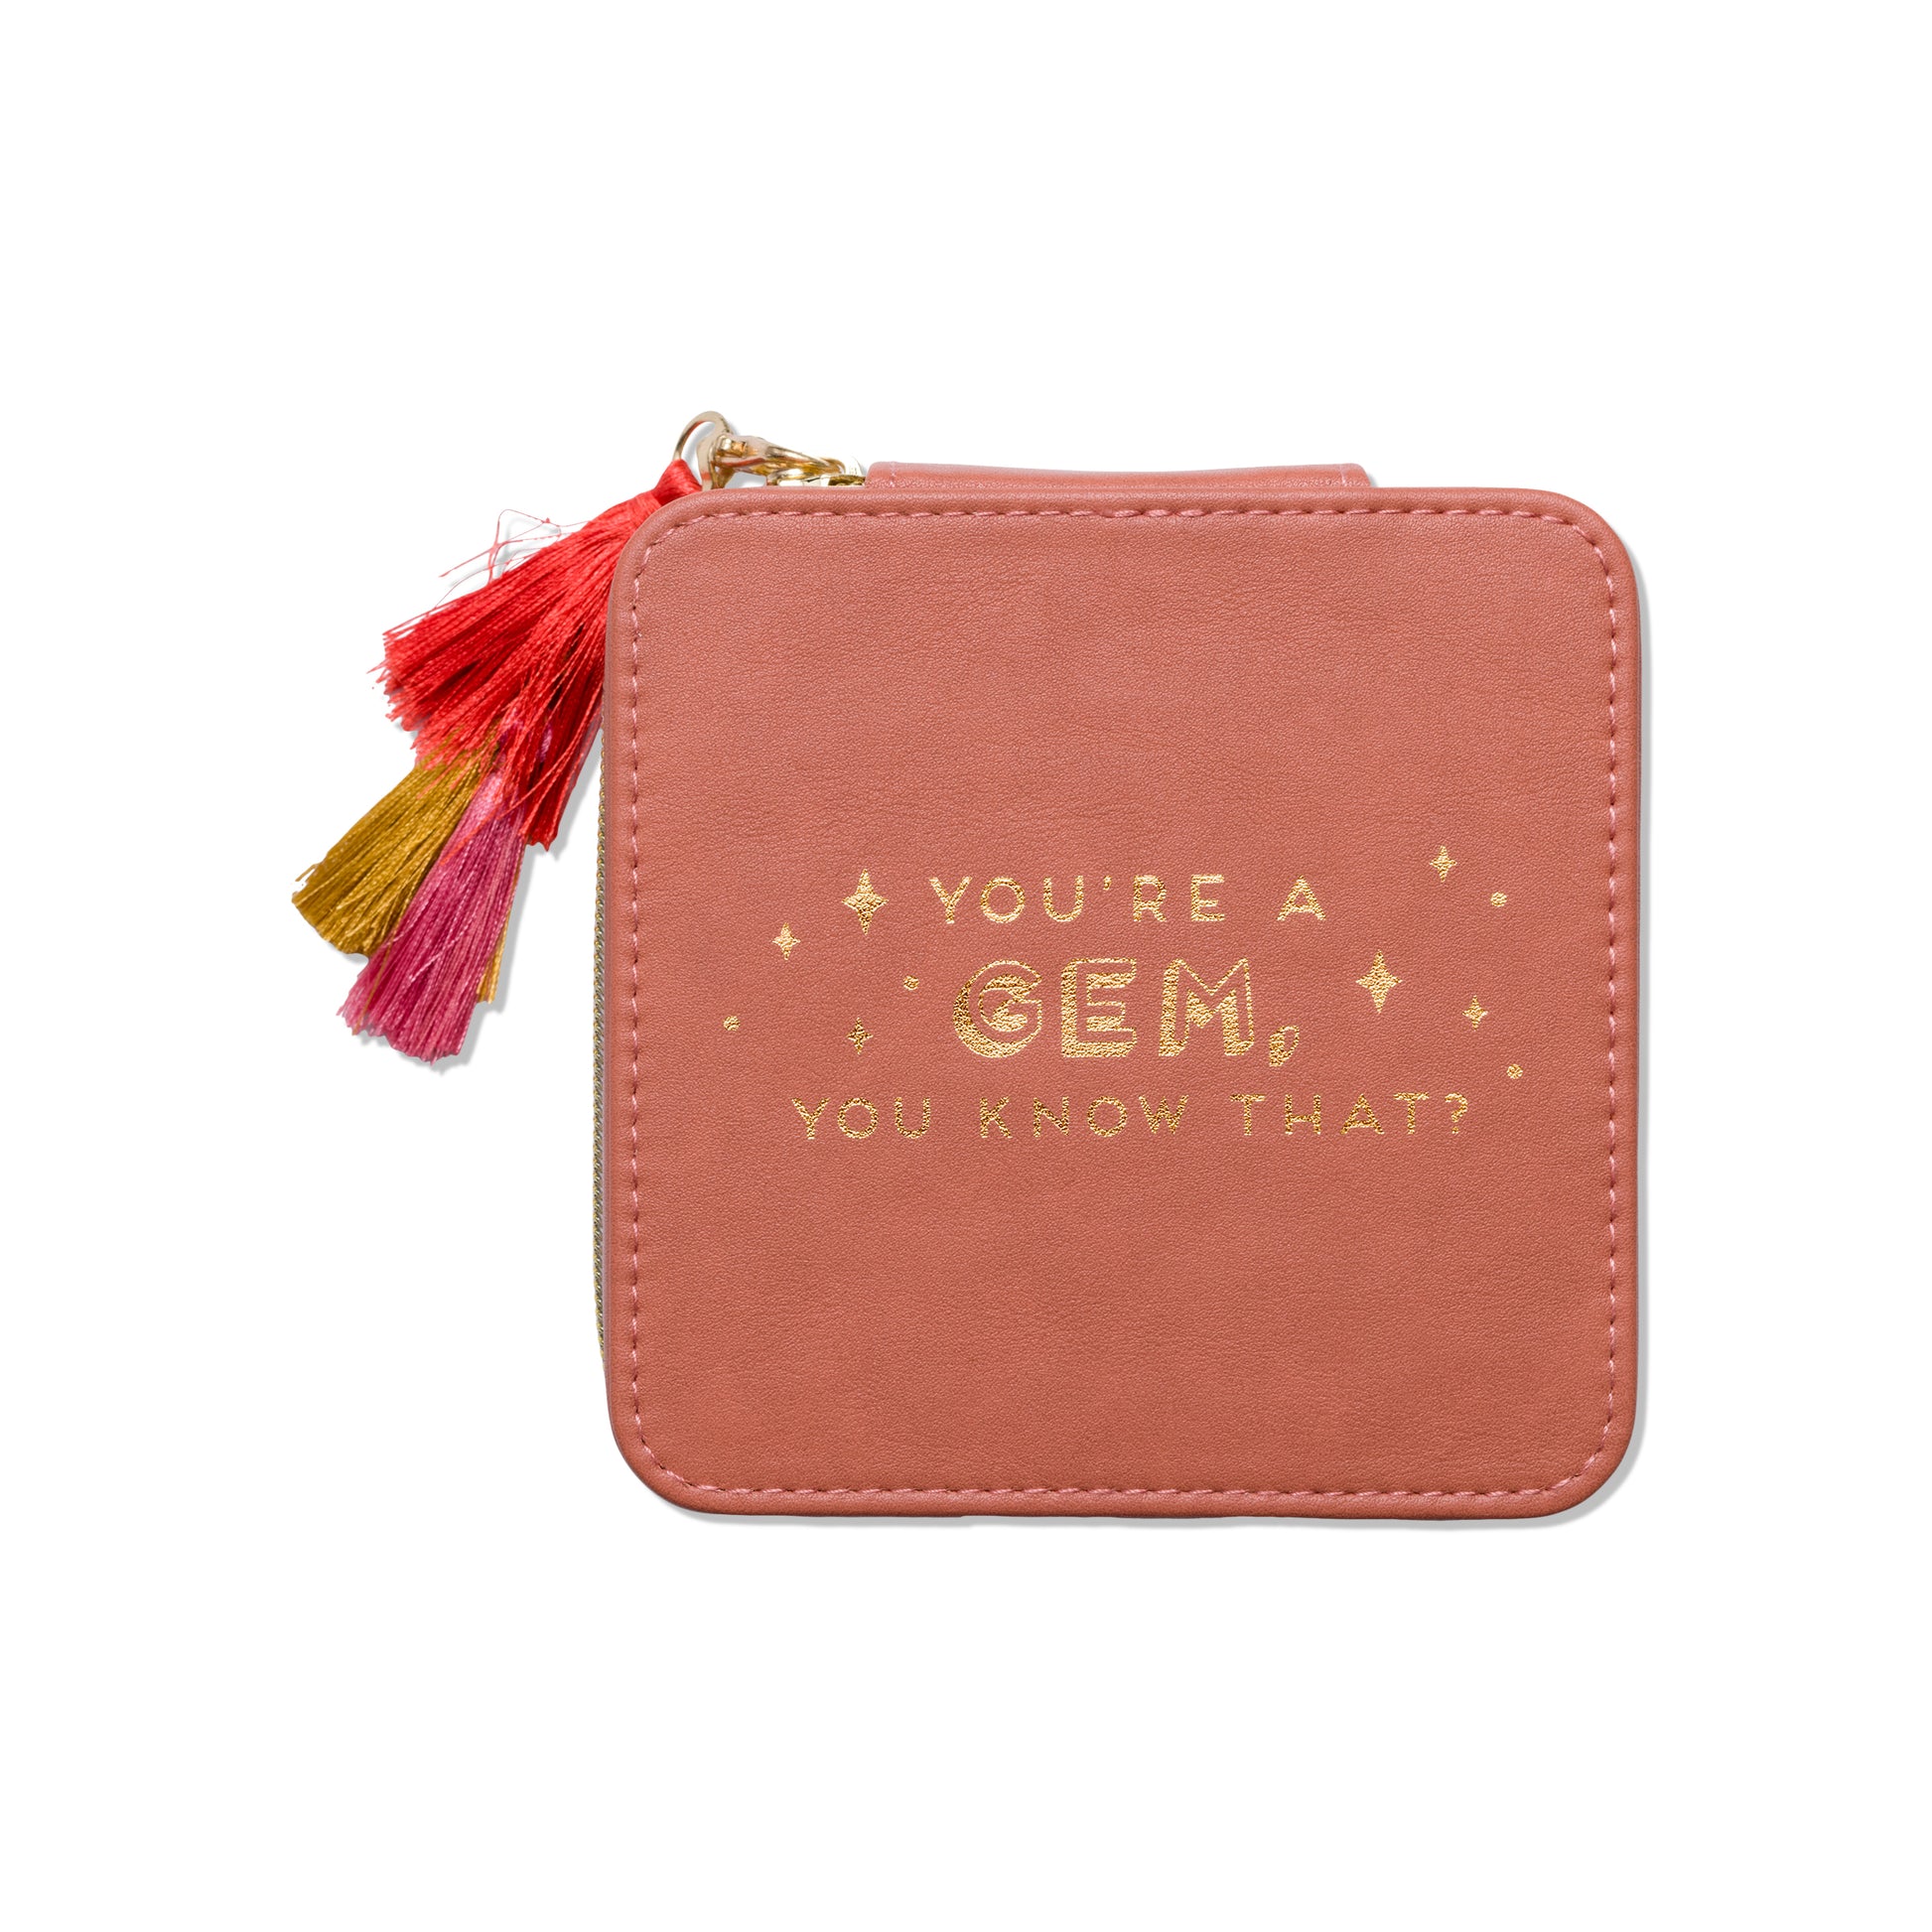 Square mini travel jewelry case with tassels and words printed "you're a Gem you know that?" on a white background